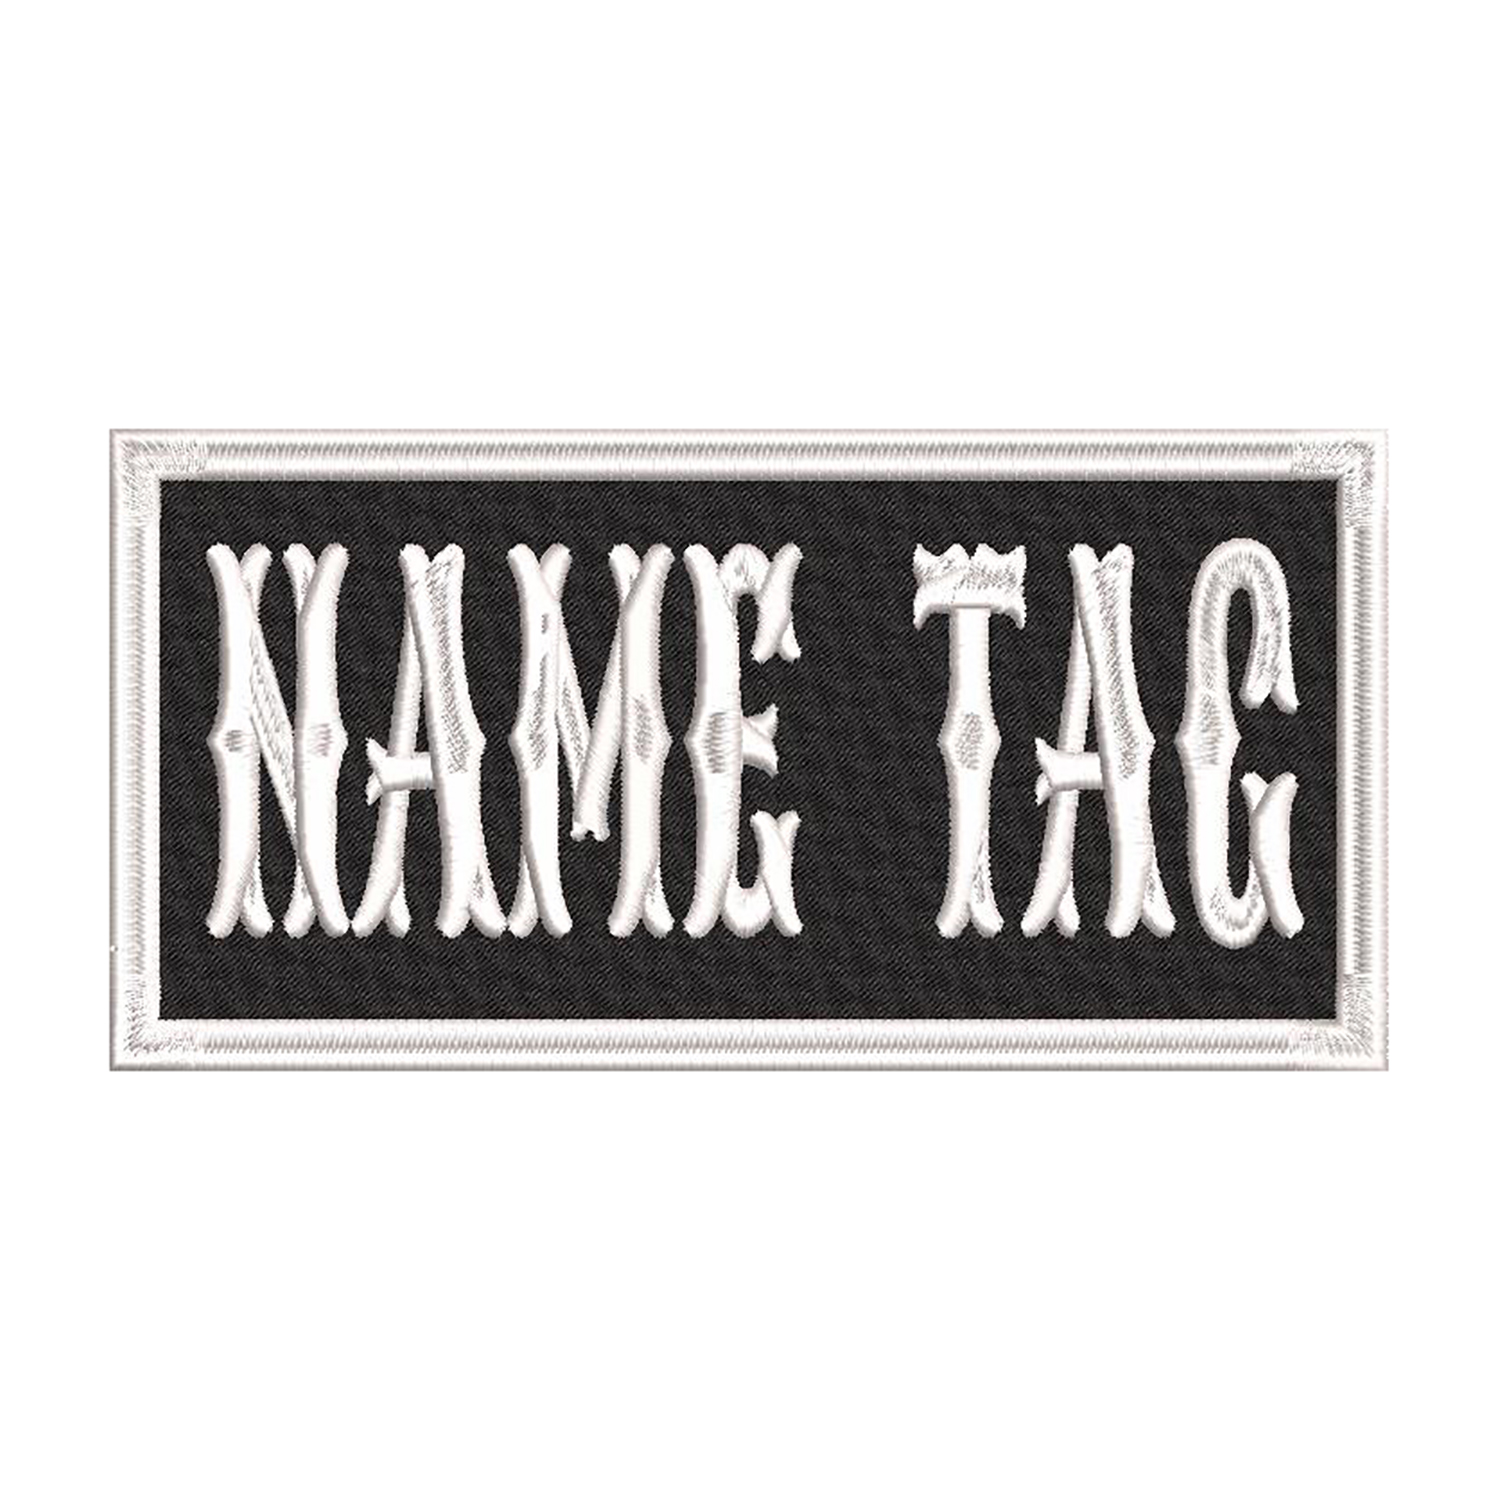 Top Quality Custom Name Patches in USA